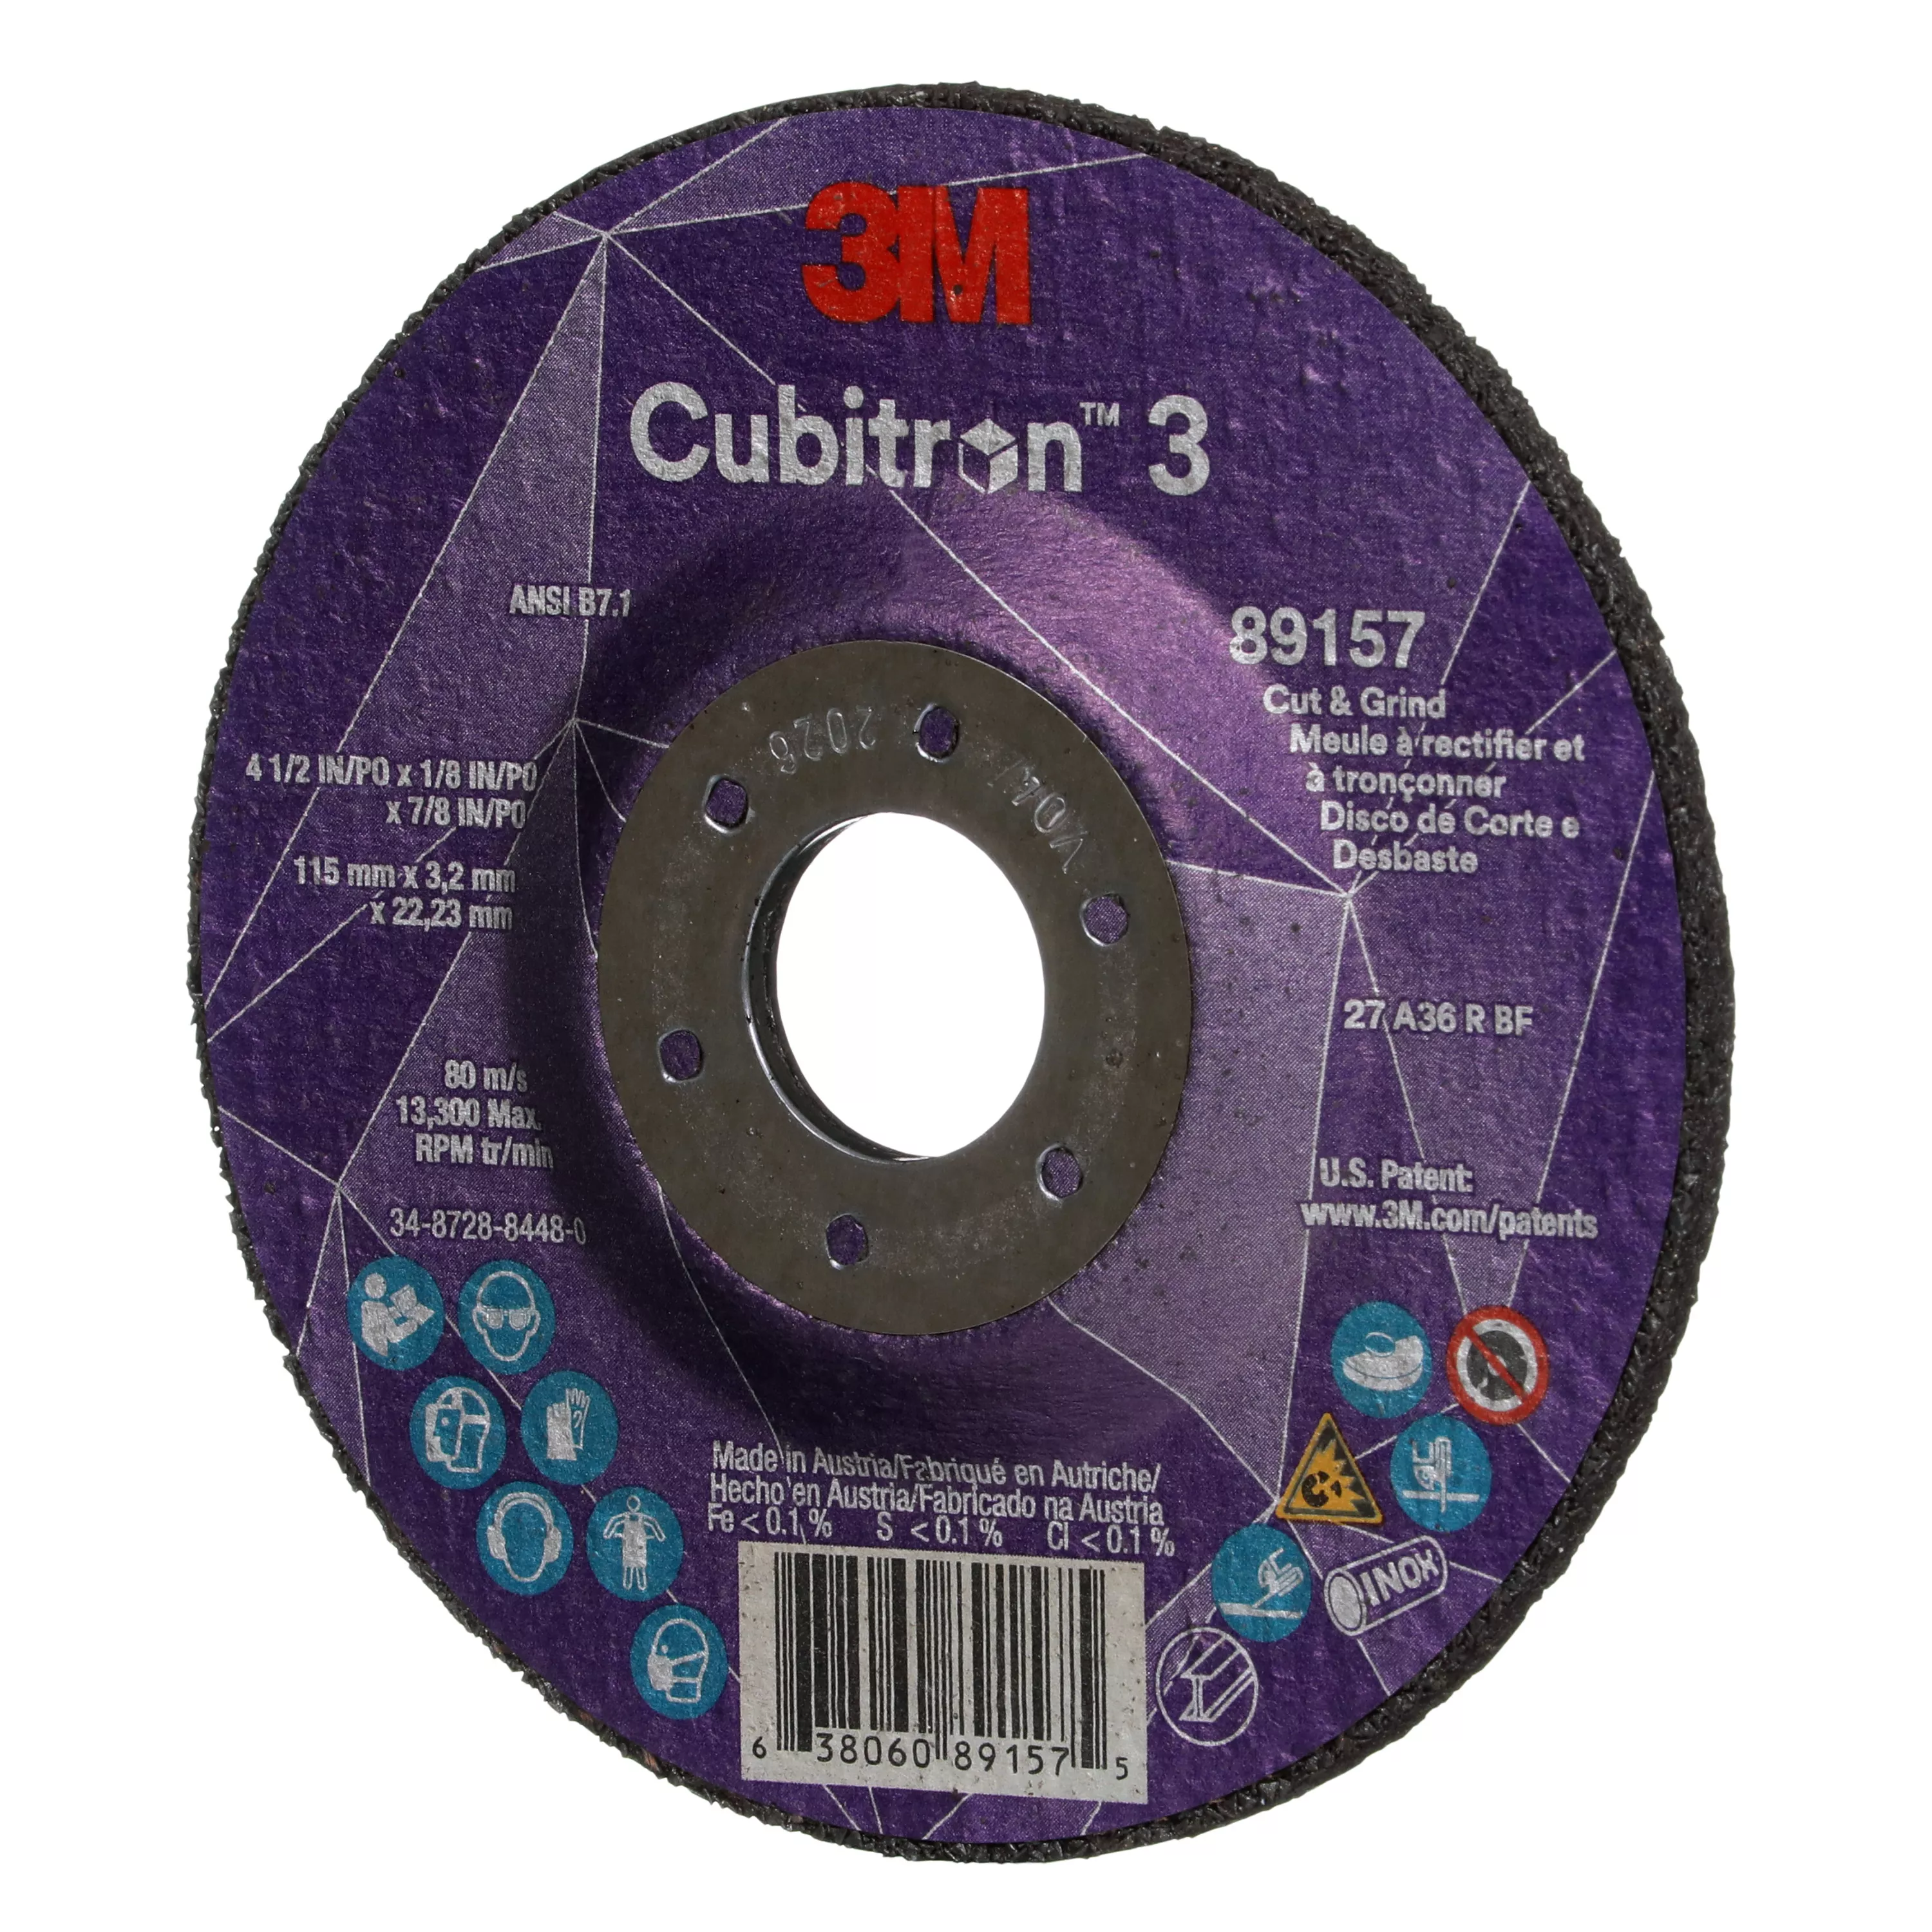 Product Number 89157 | 3M™ Cubitron™ 3 Cut and Grind Wheel